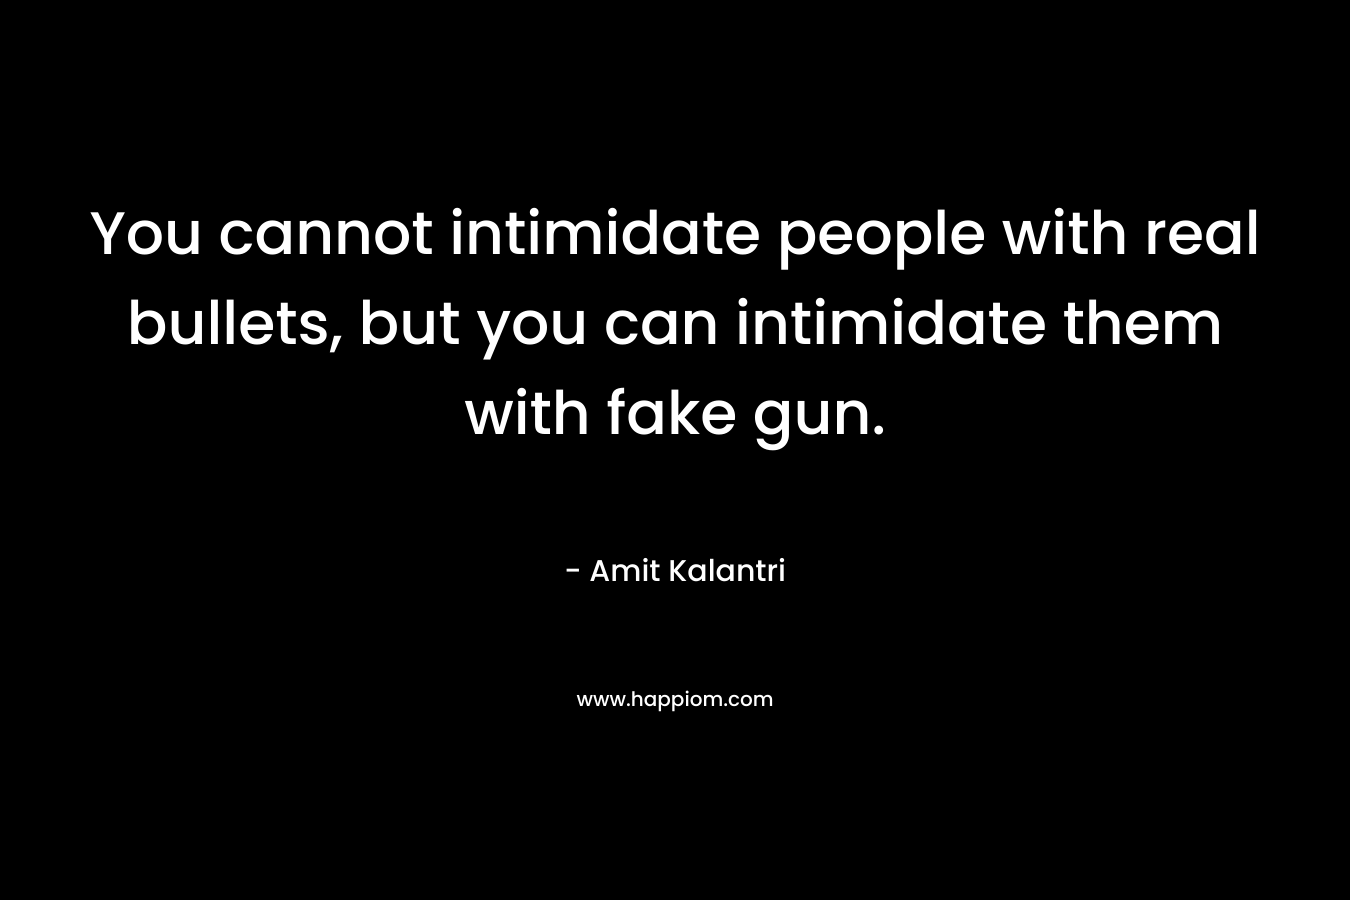 You cannot intimidate people with real bullets, but you can intimidate them with fake gun.